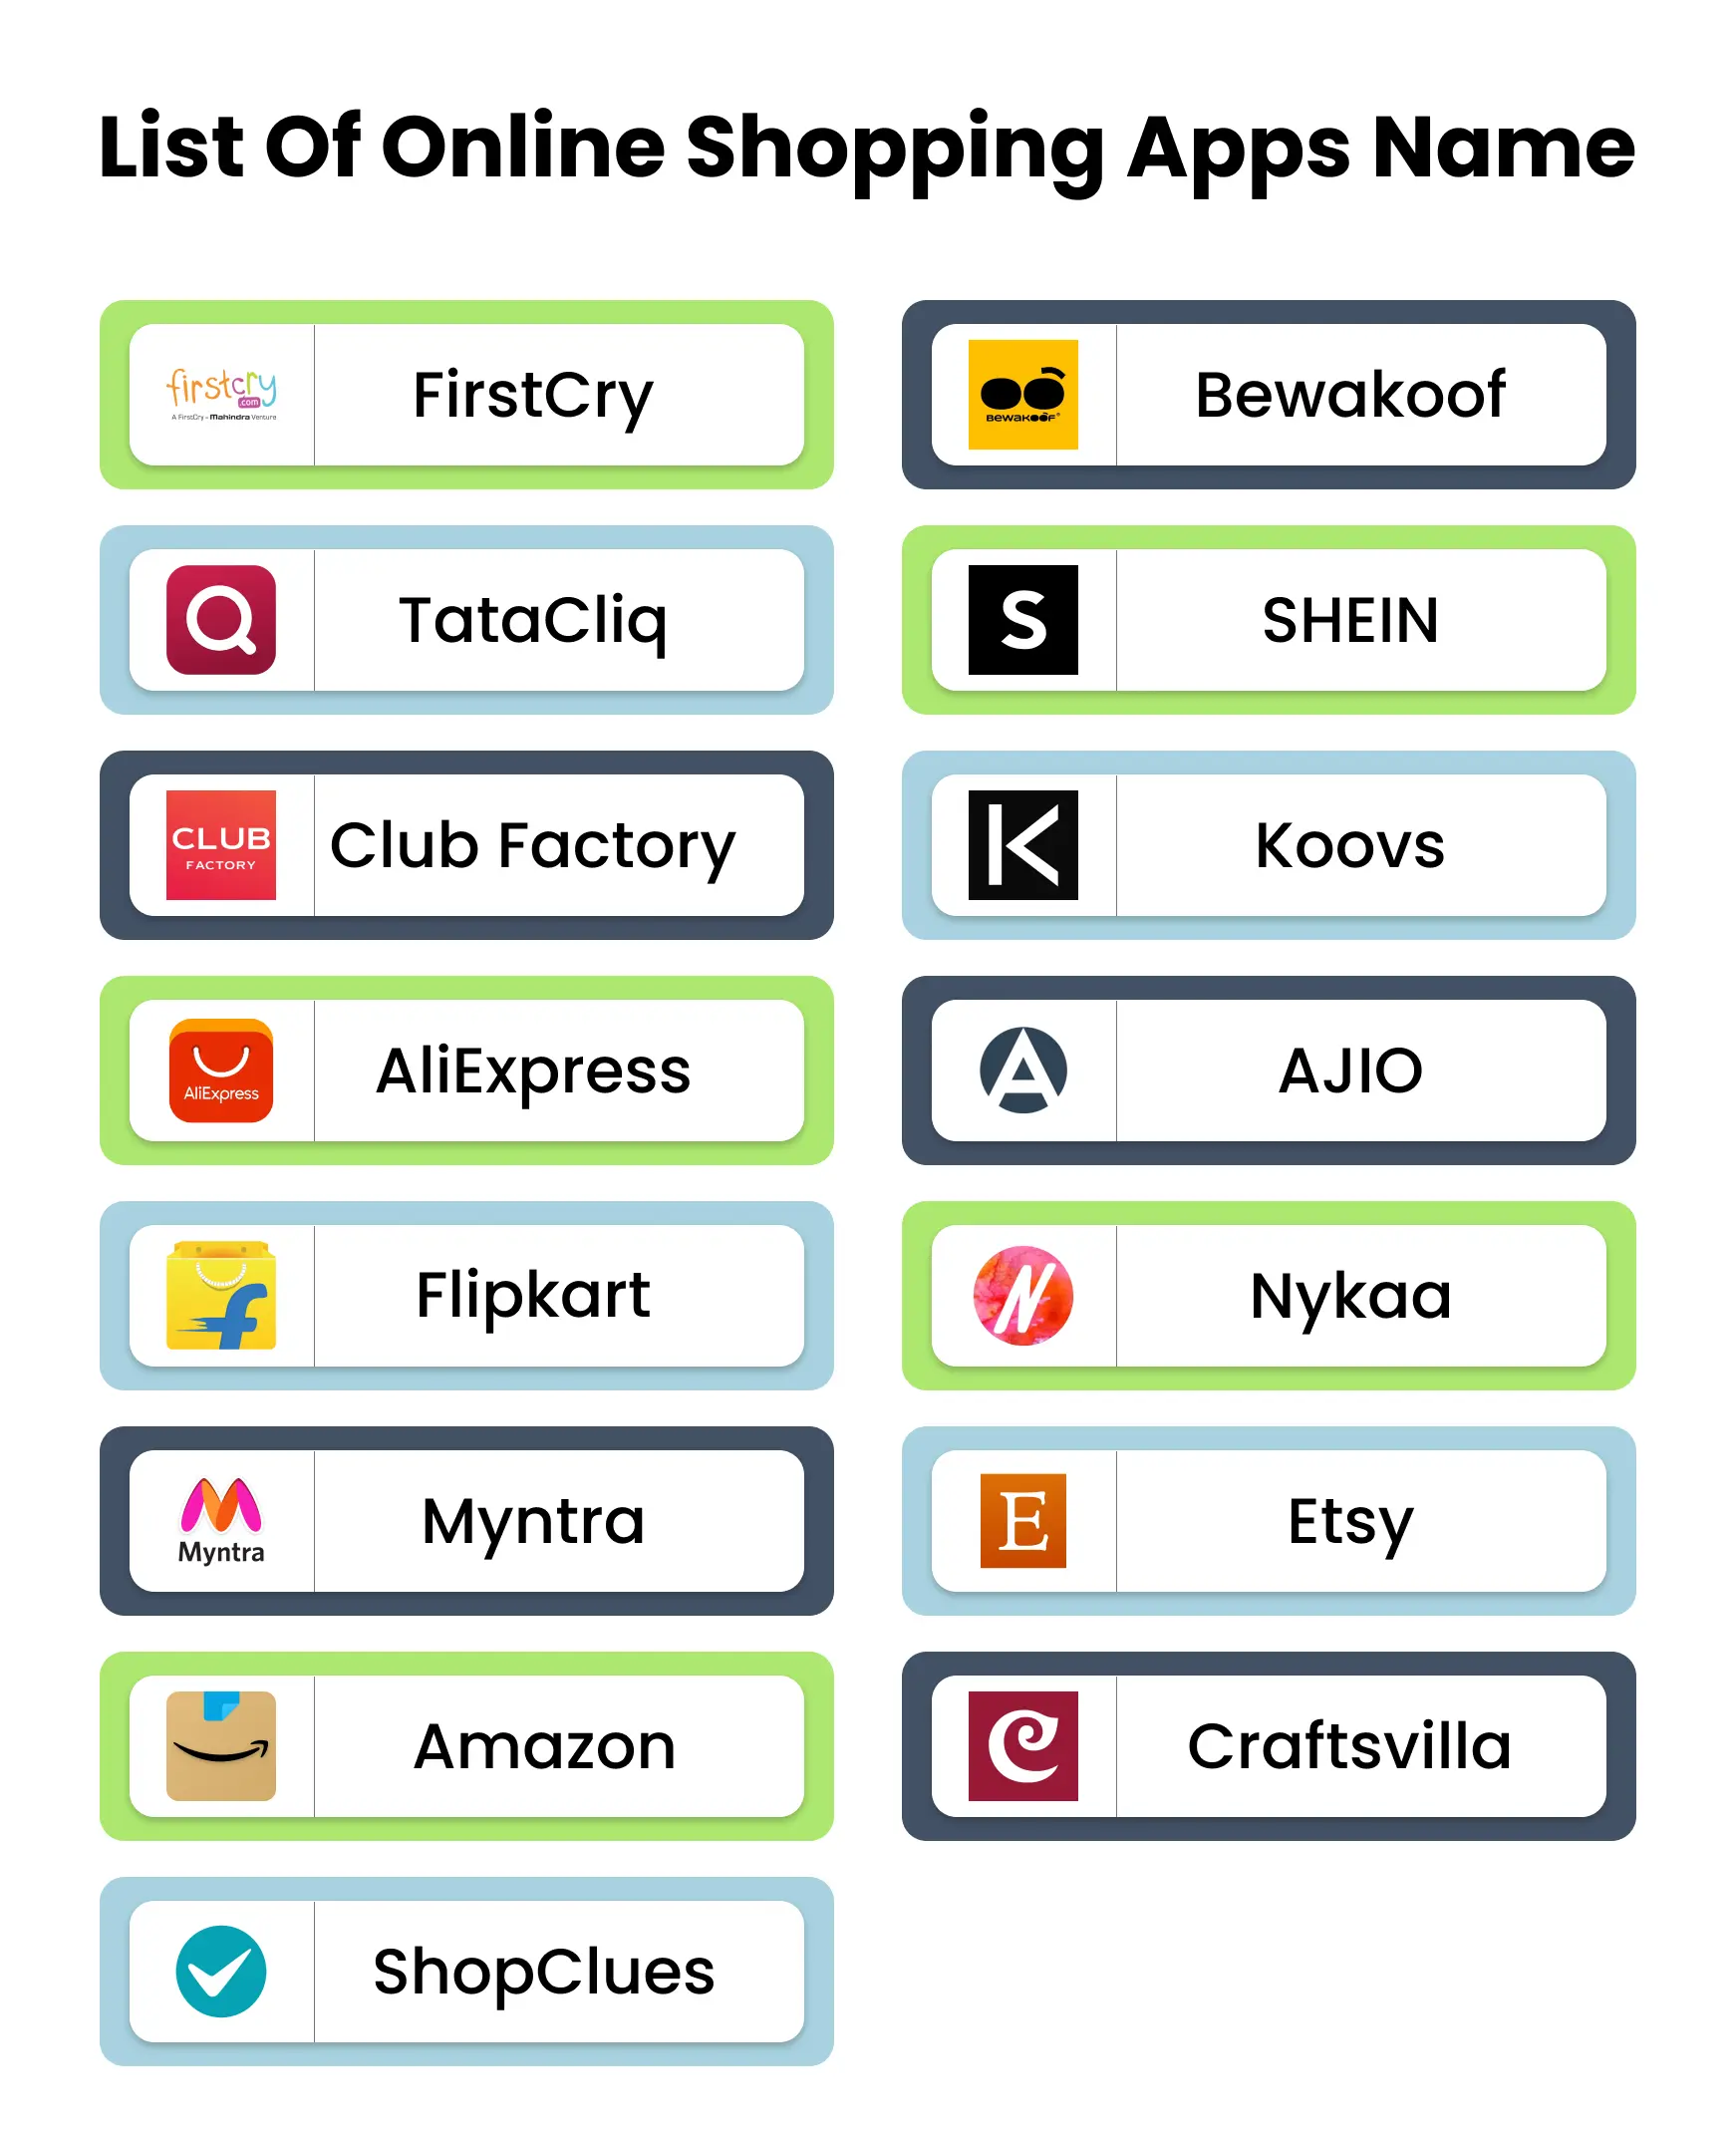 List of online shopping apps name